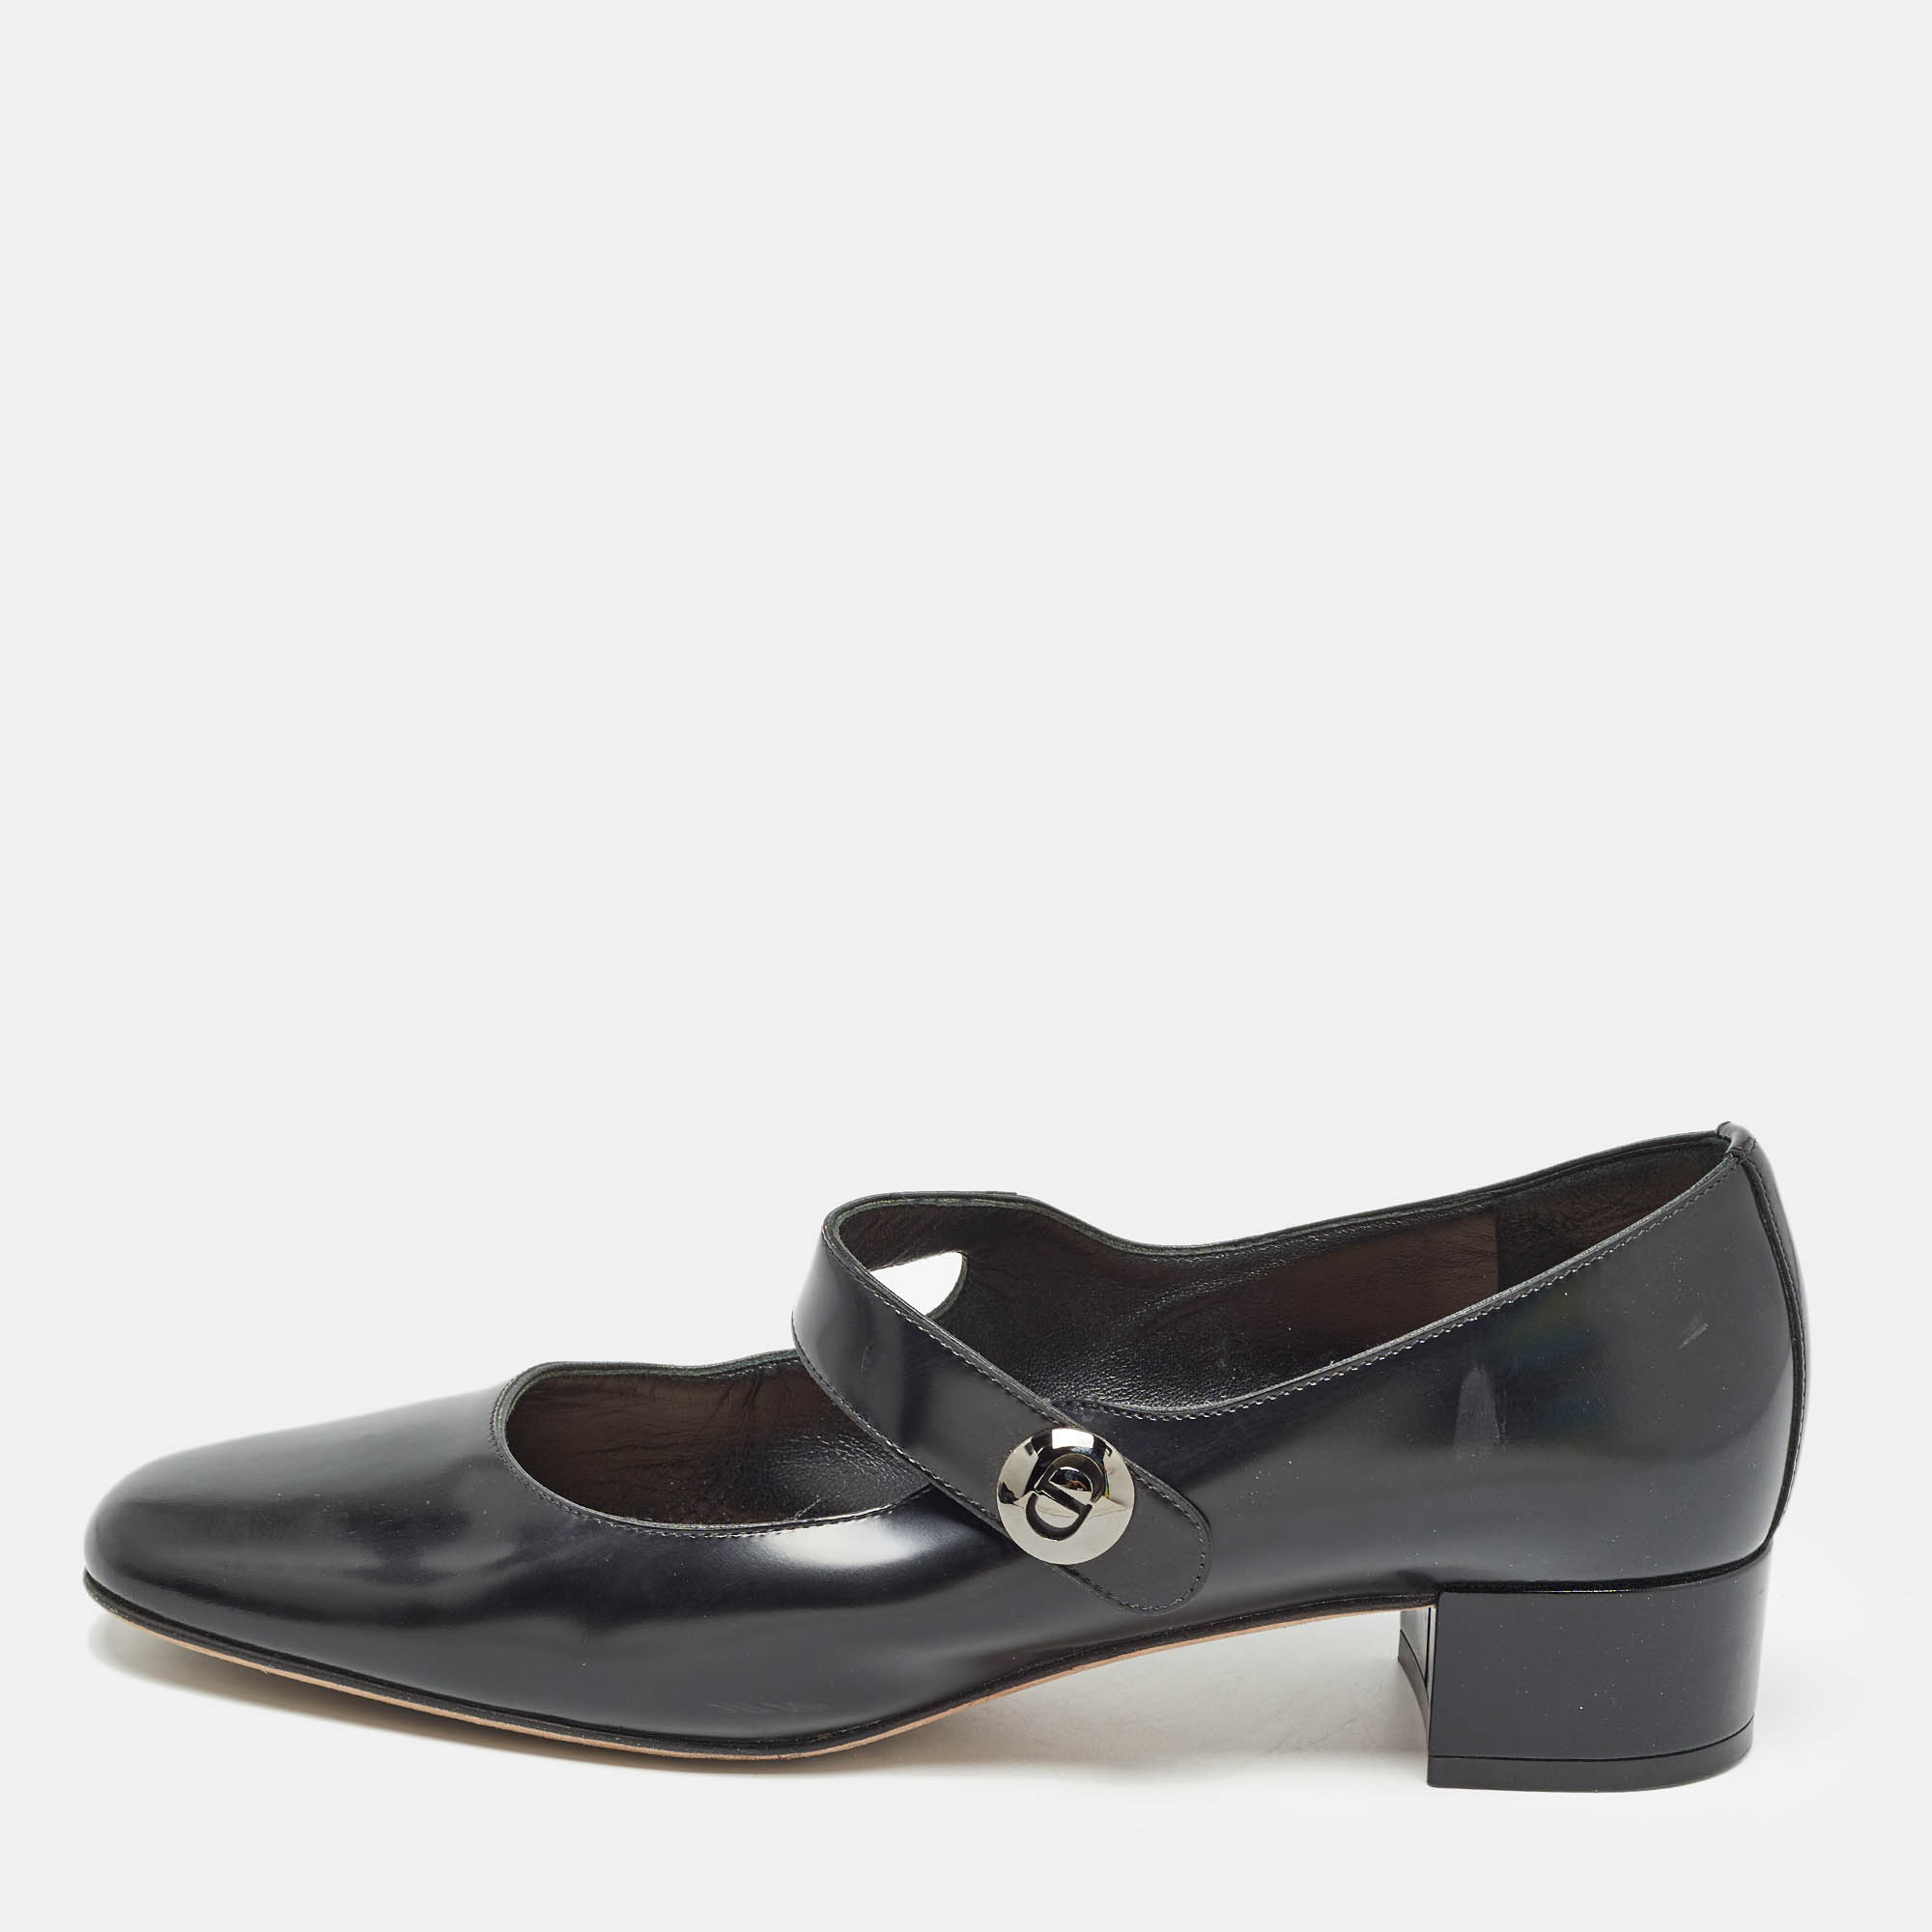 

Dior Black Leather Mary Jane Ballet Flats Size